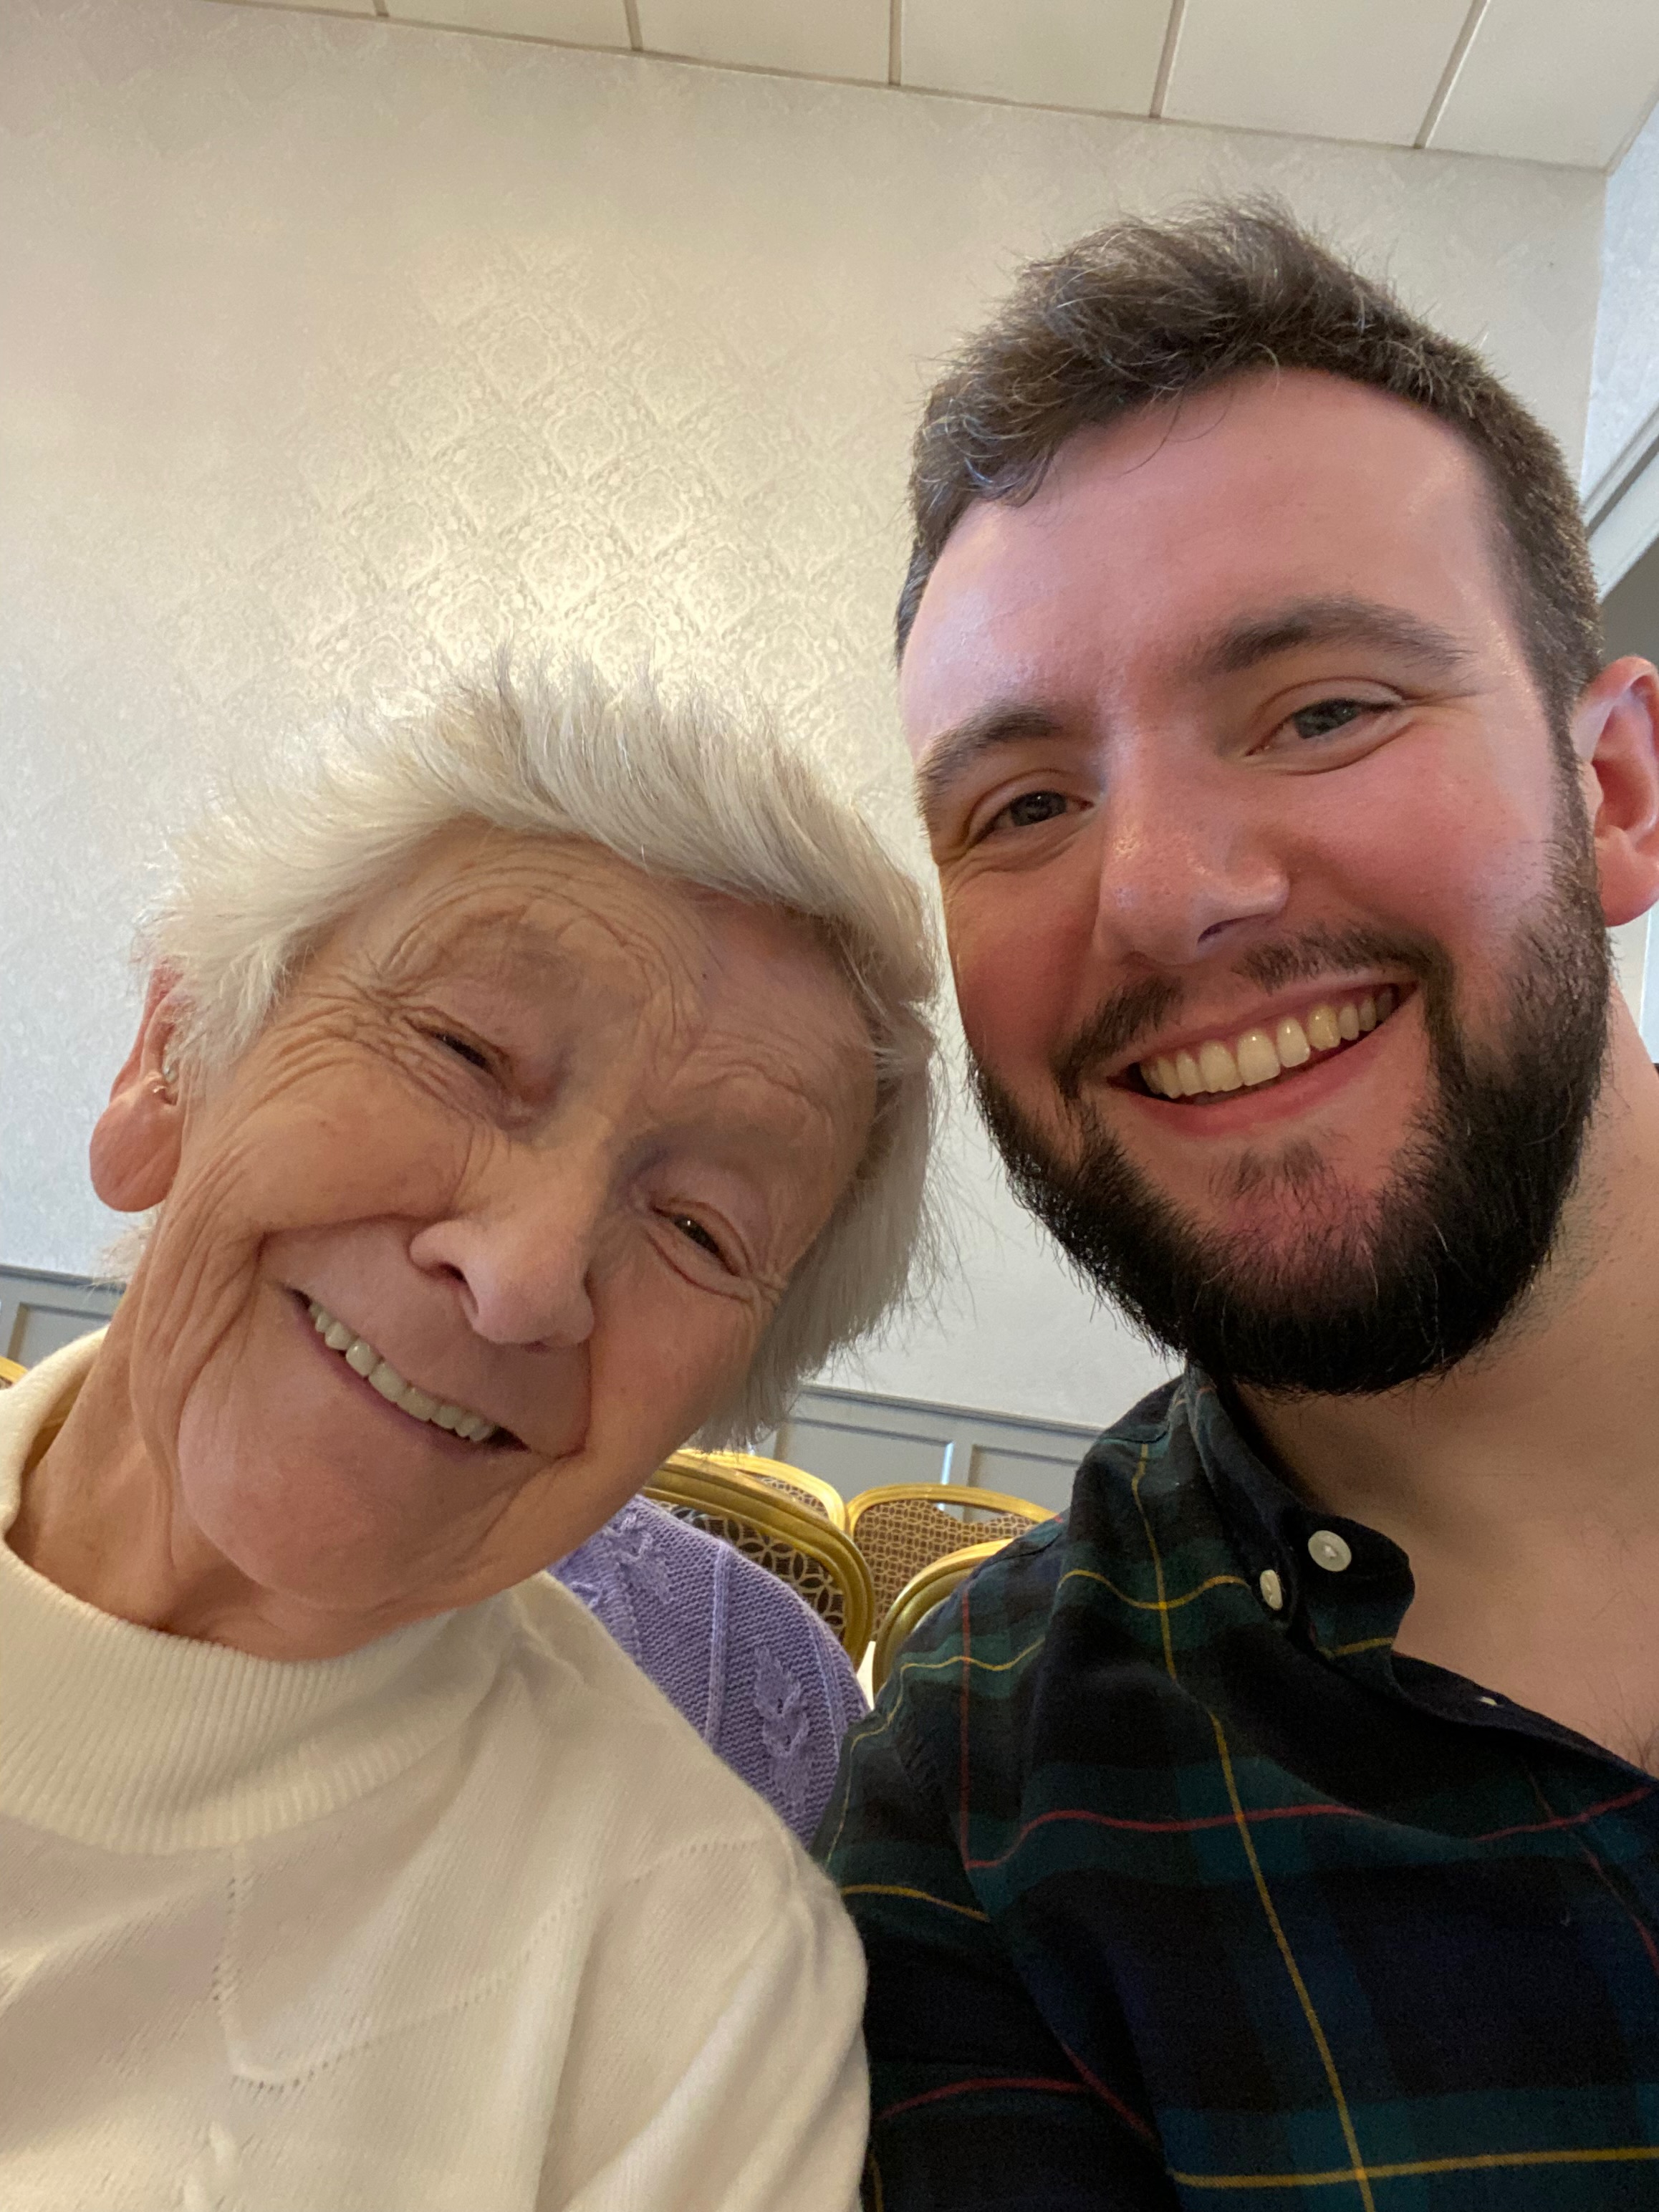 Me and Granny, taken last year.